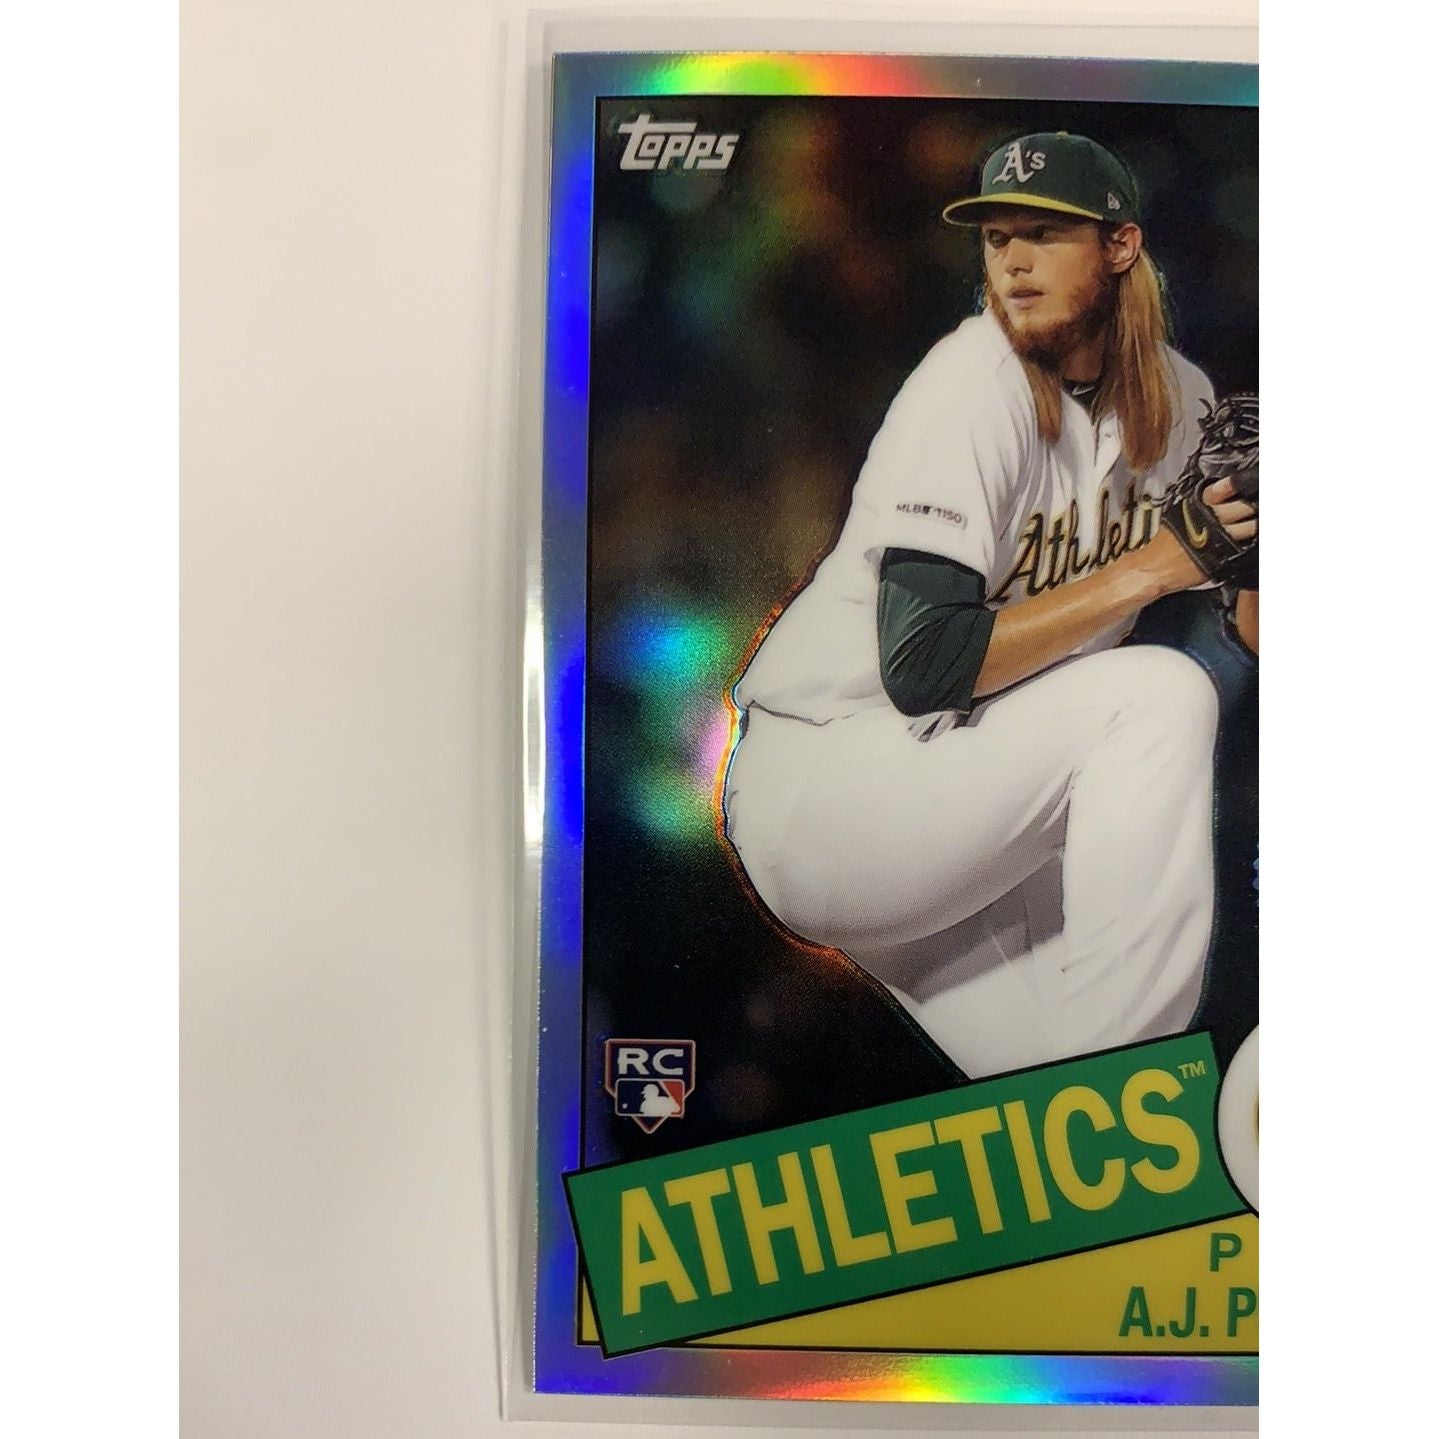  2020 Topps AJ Puk 35th Anniversary Chrome Refractor RC  Local Legends Cards & Collectibles